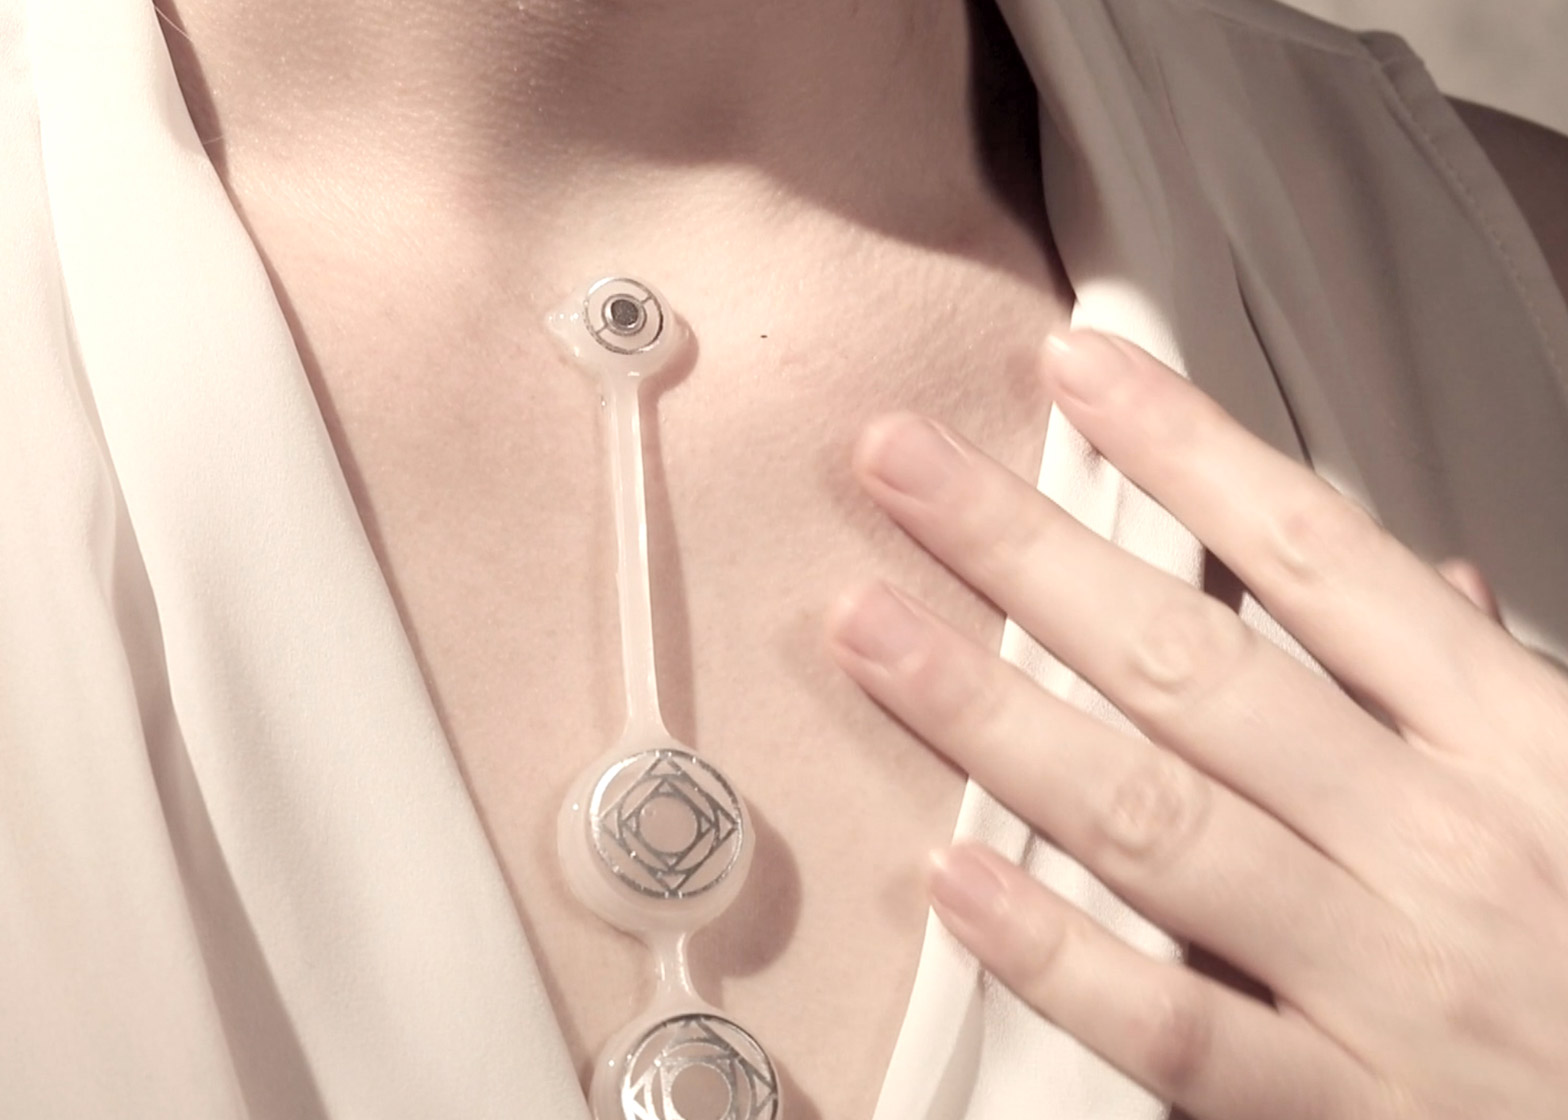 Wisp Wearables Are An Alternative To Intense Sex Toys 